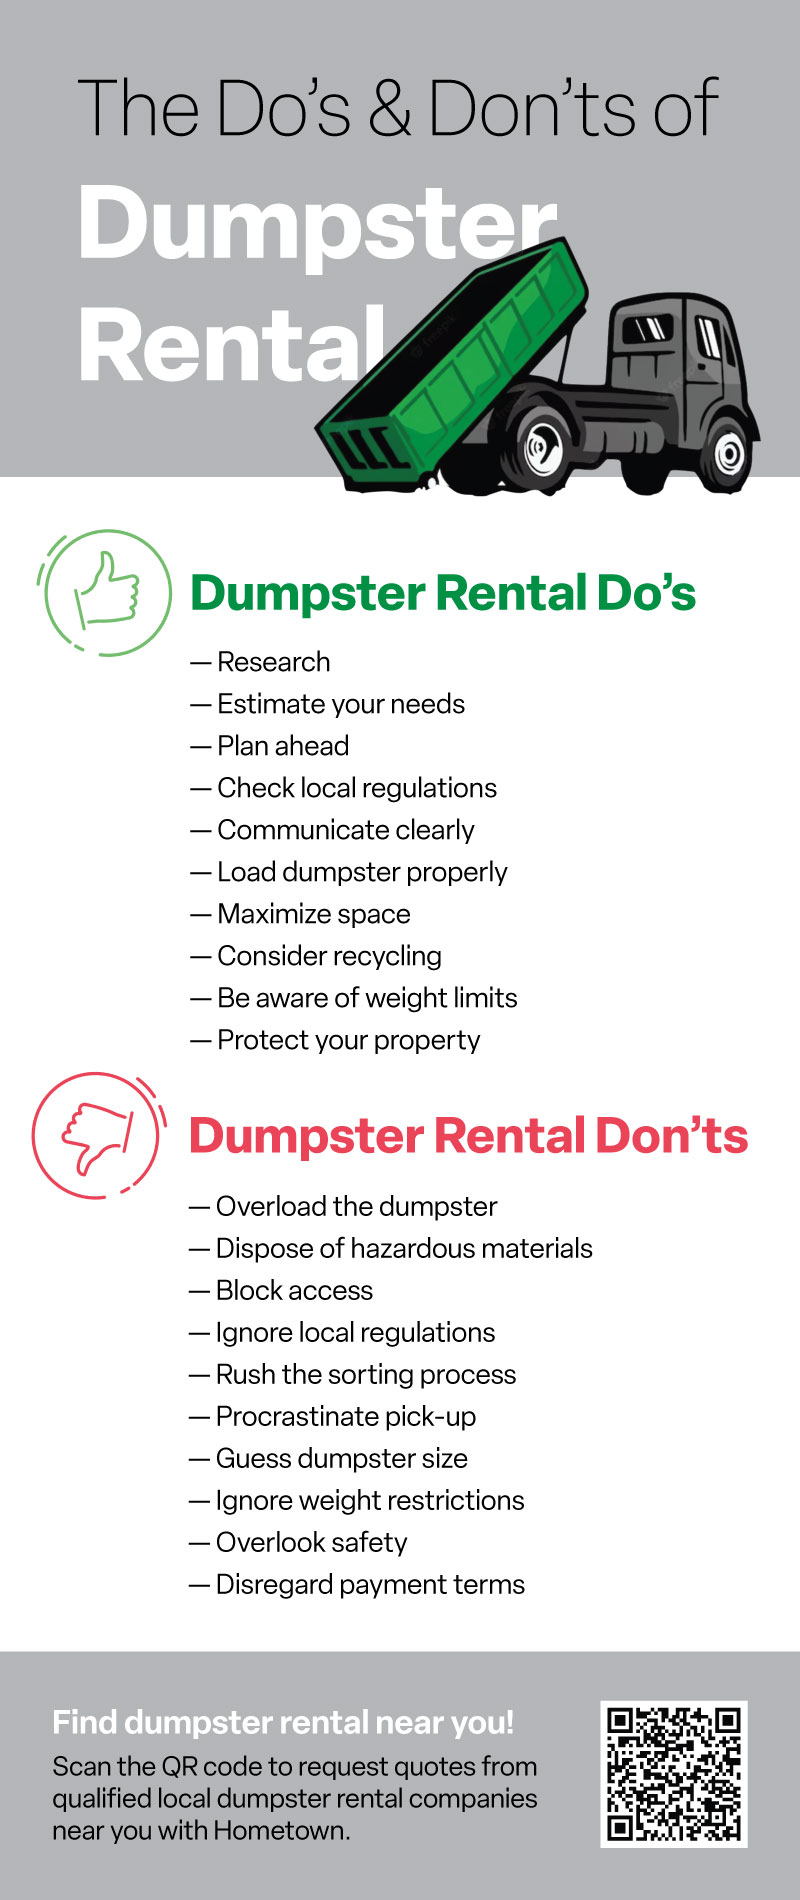 infographic showing dumpster rental do's and don'ts